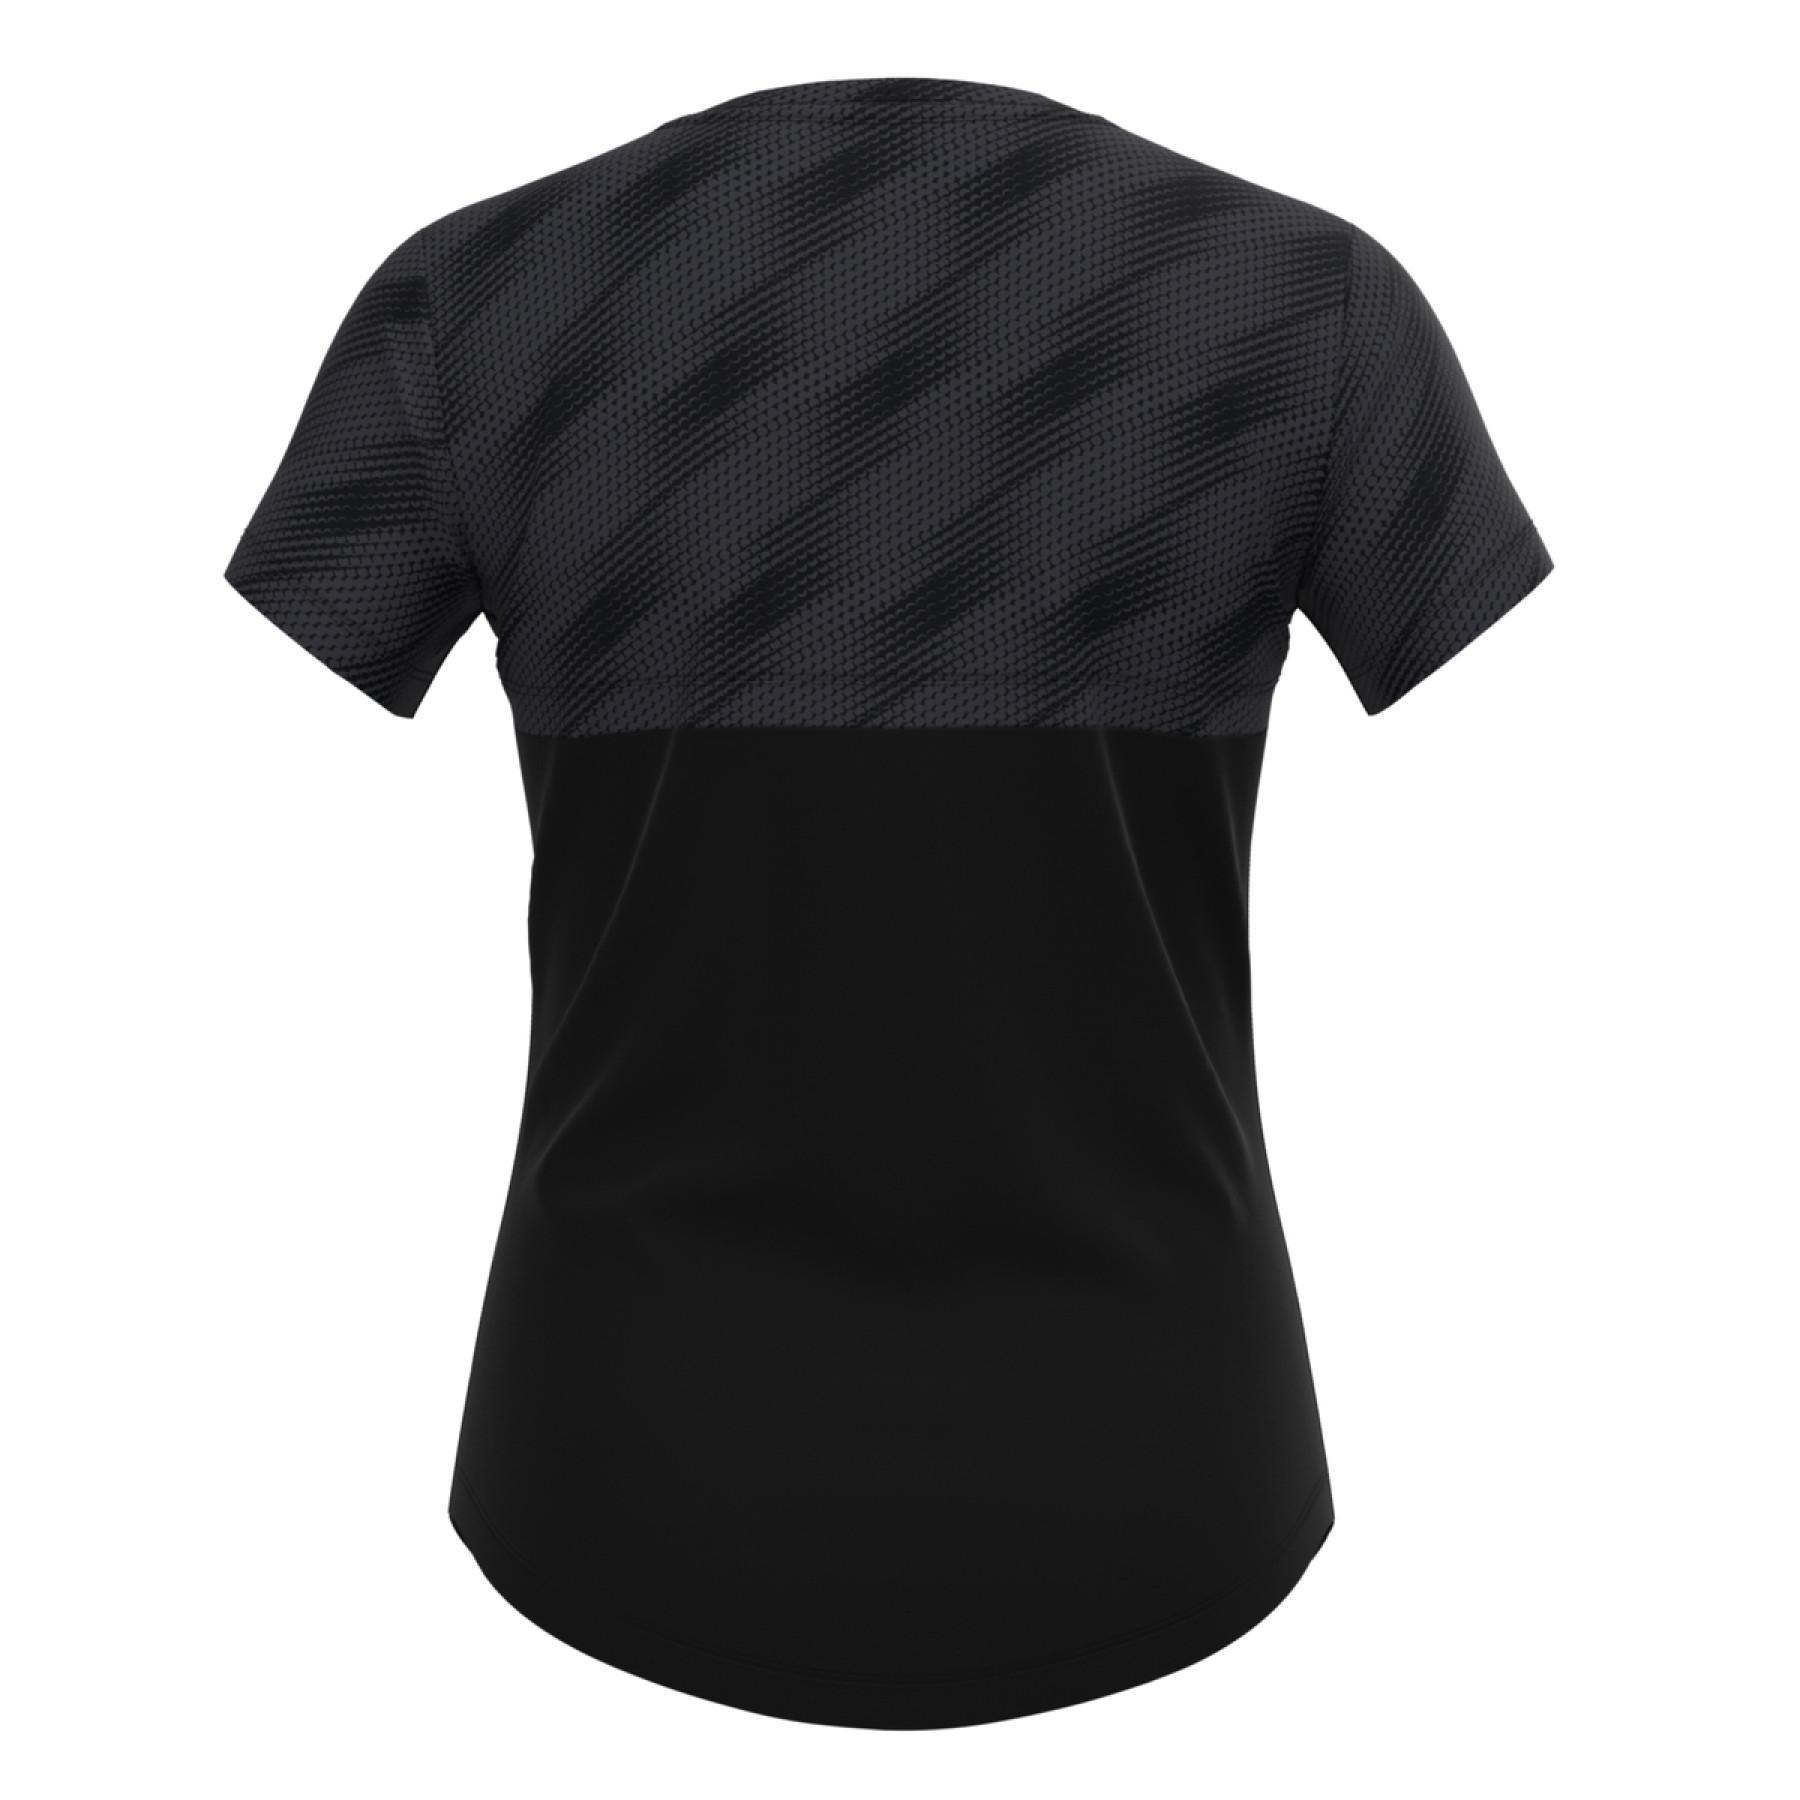 Maillot de mujer Under Armour à manches courtes Streaker Run clipse